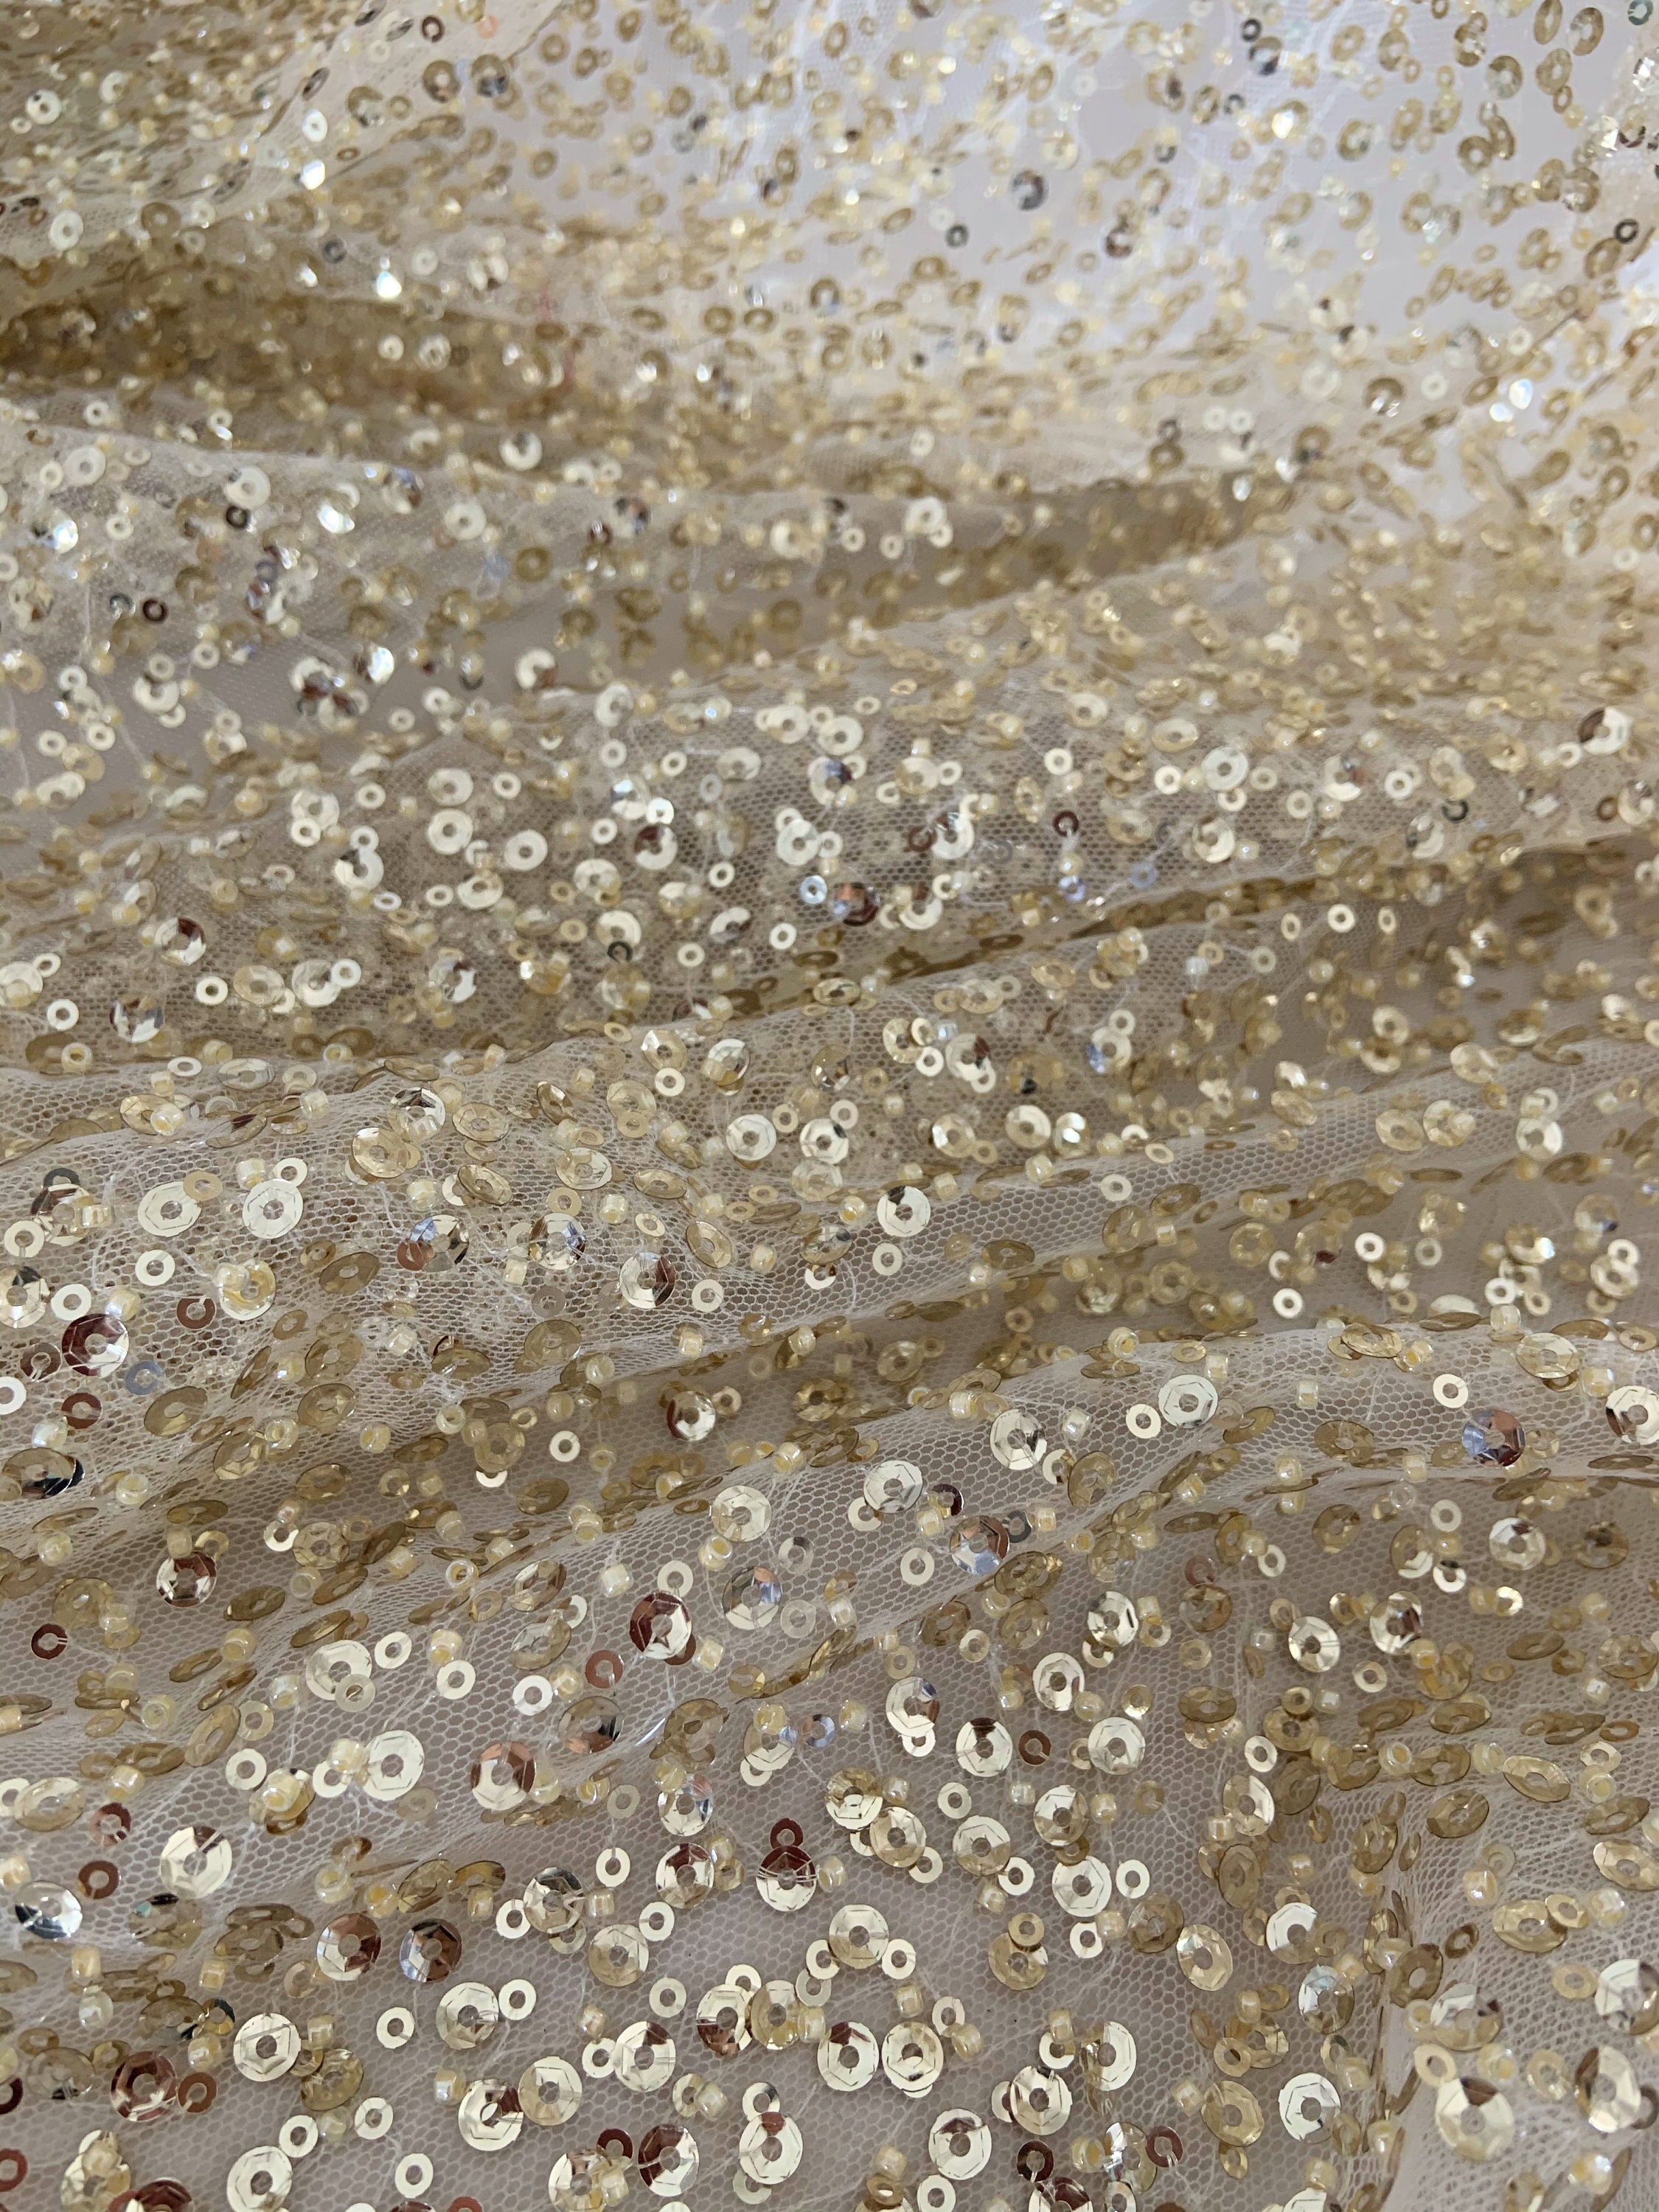 Champagne Gold Lace Fabric With Sequins Golden Bead Lace | Etsy